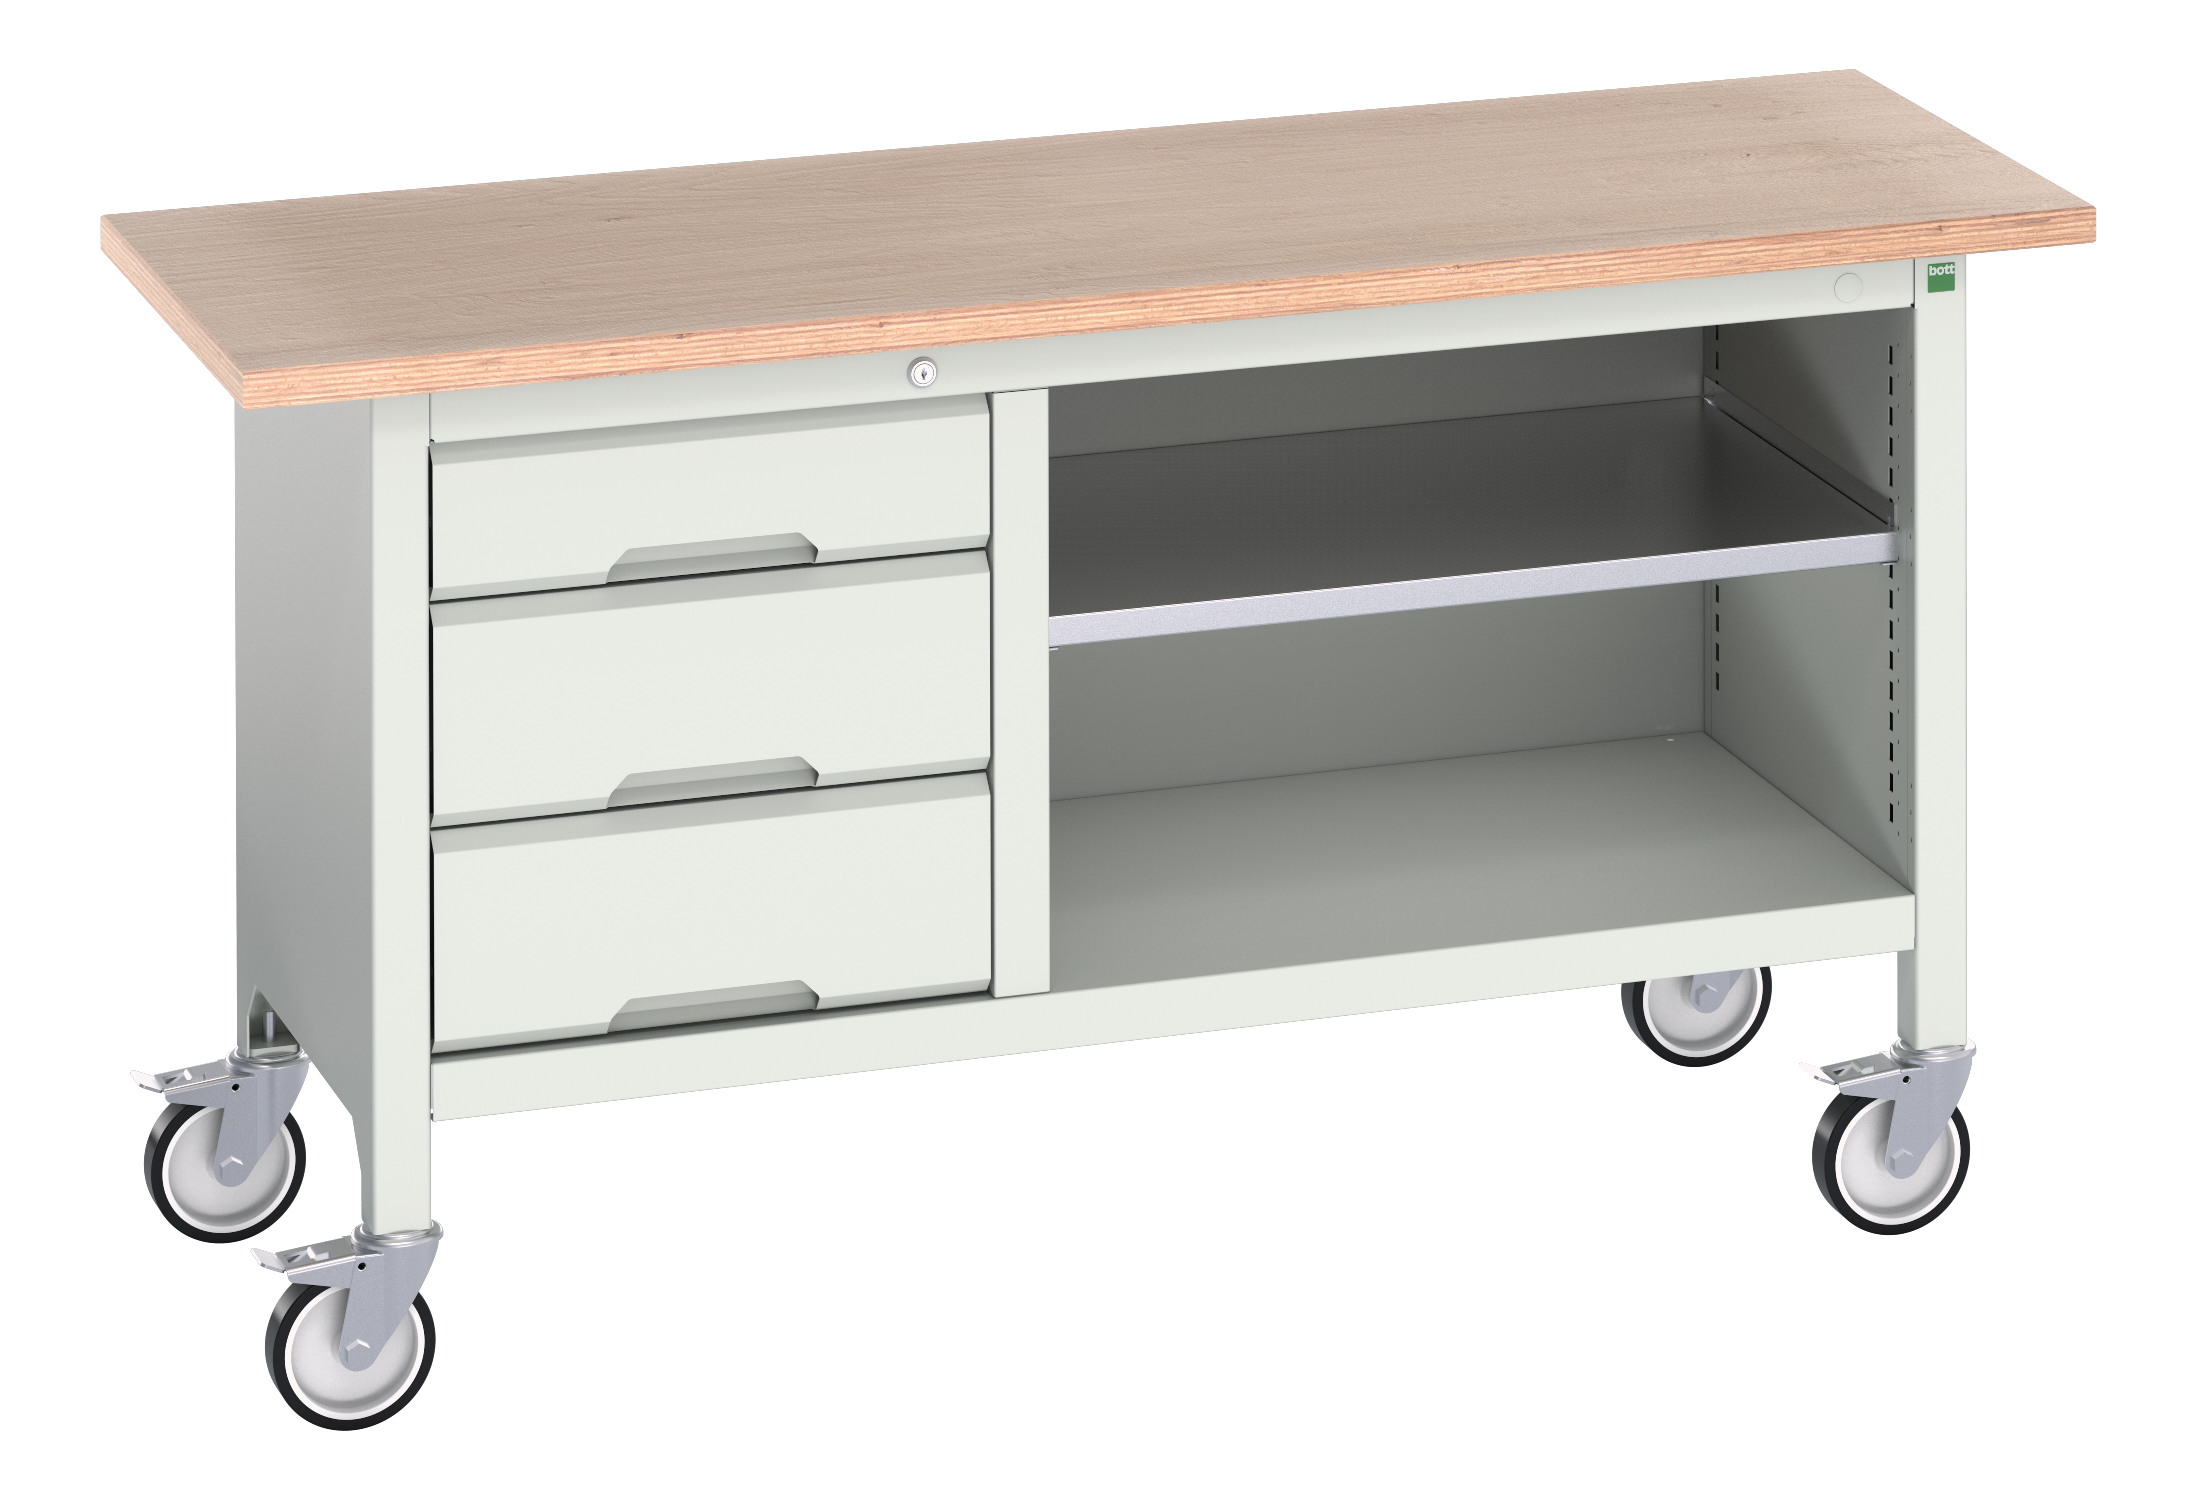 Bott Verso Mobile Storage Bench With 3 Drawer Cabinet / Open Cupboard - 16923212.16